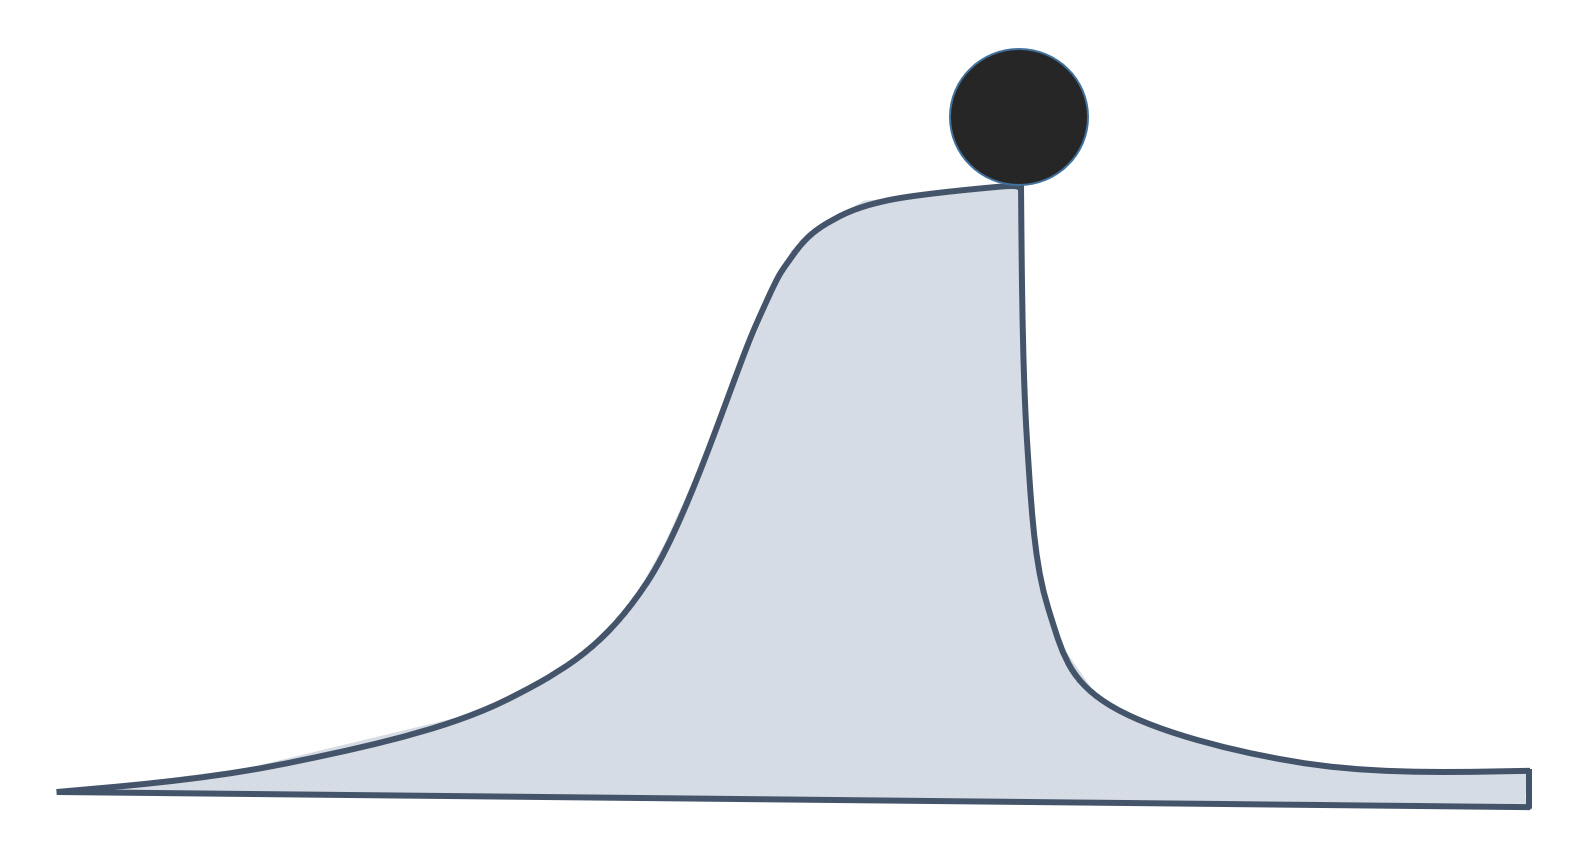 Schematic showing a ball balancing on the tip of a cliff